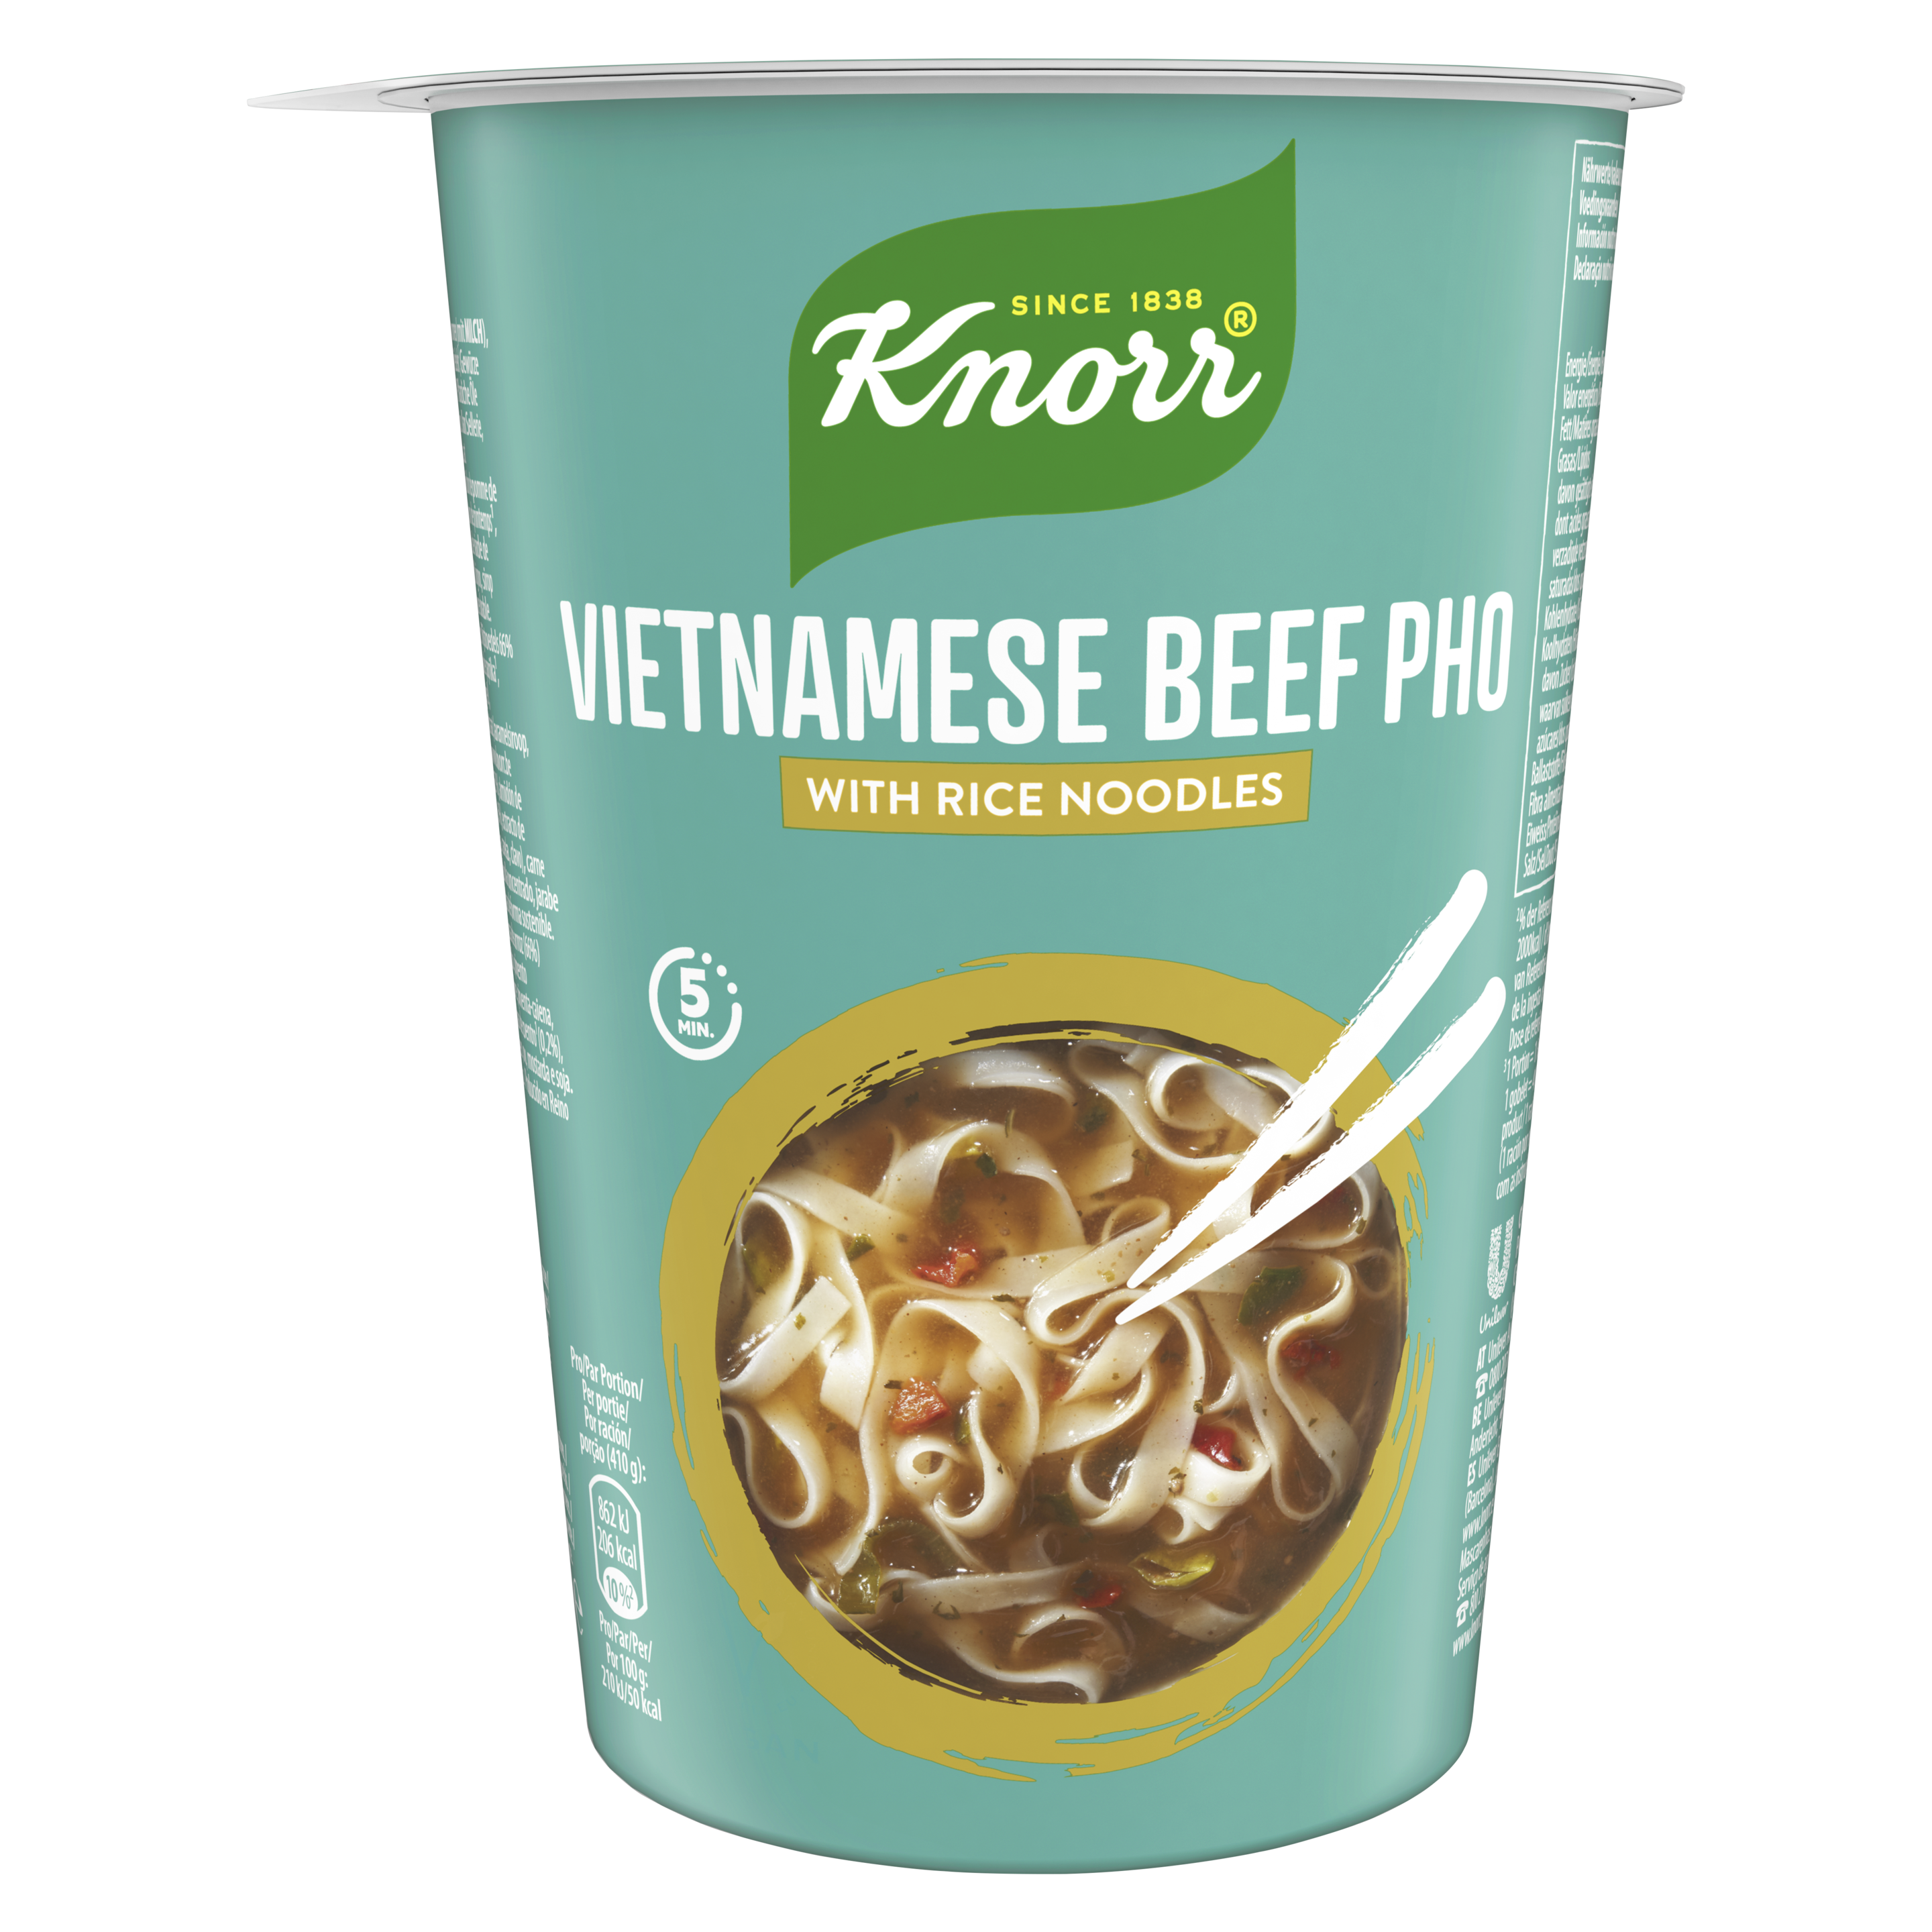 KNORR Vietnamese beef pho with rice noodles gobelet 1 portion